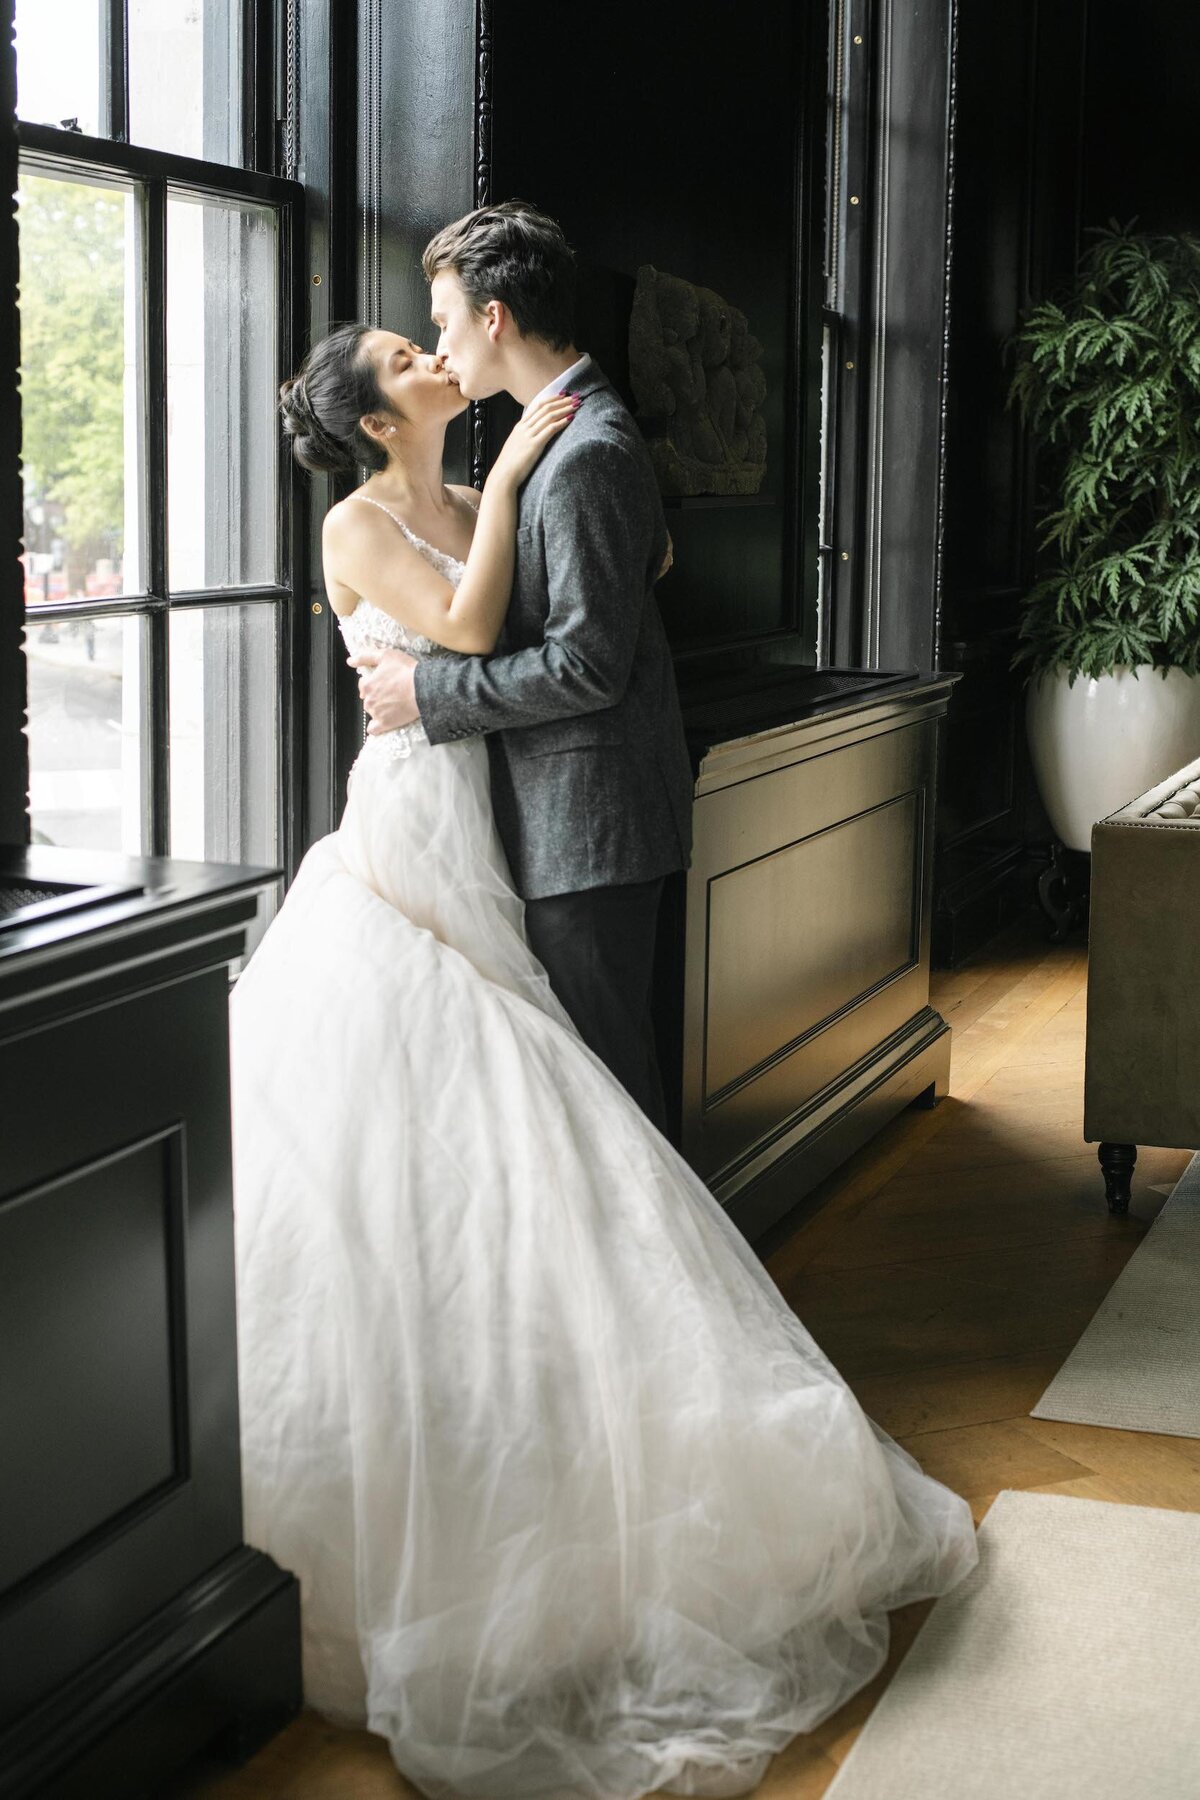 Brise and groom kissing